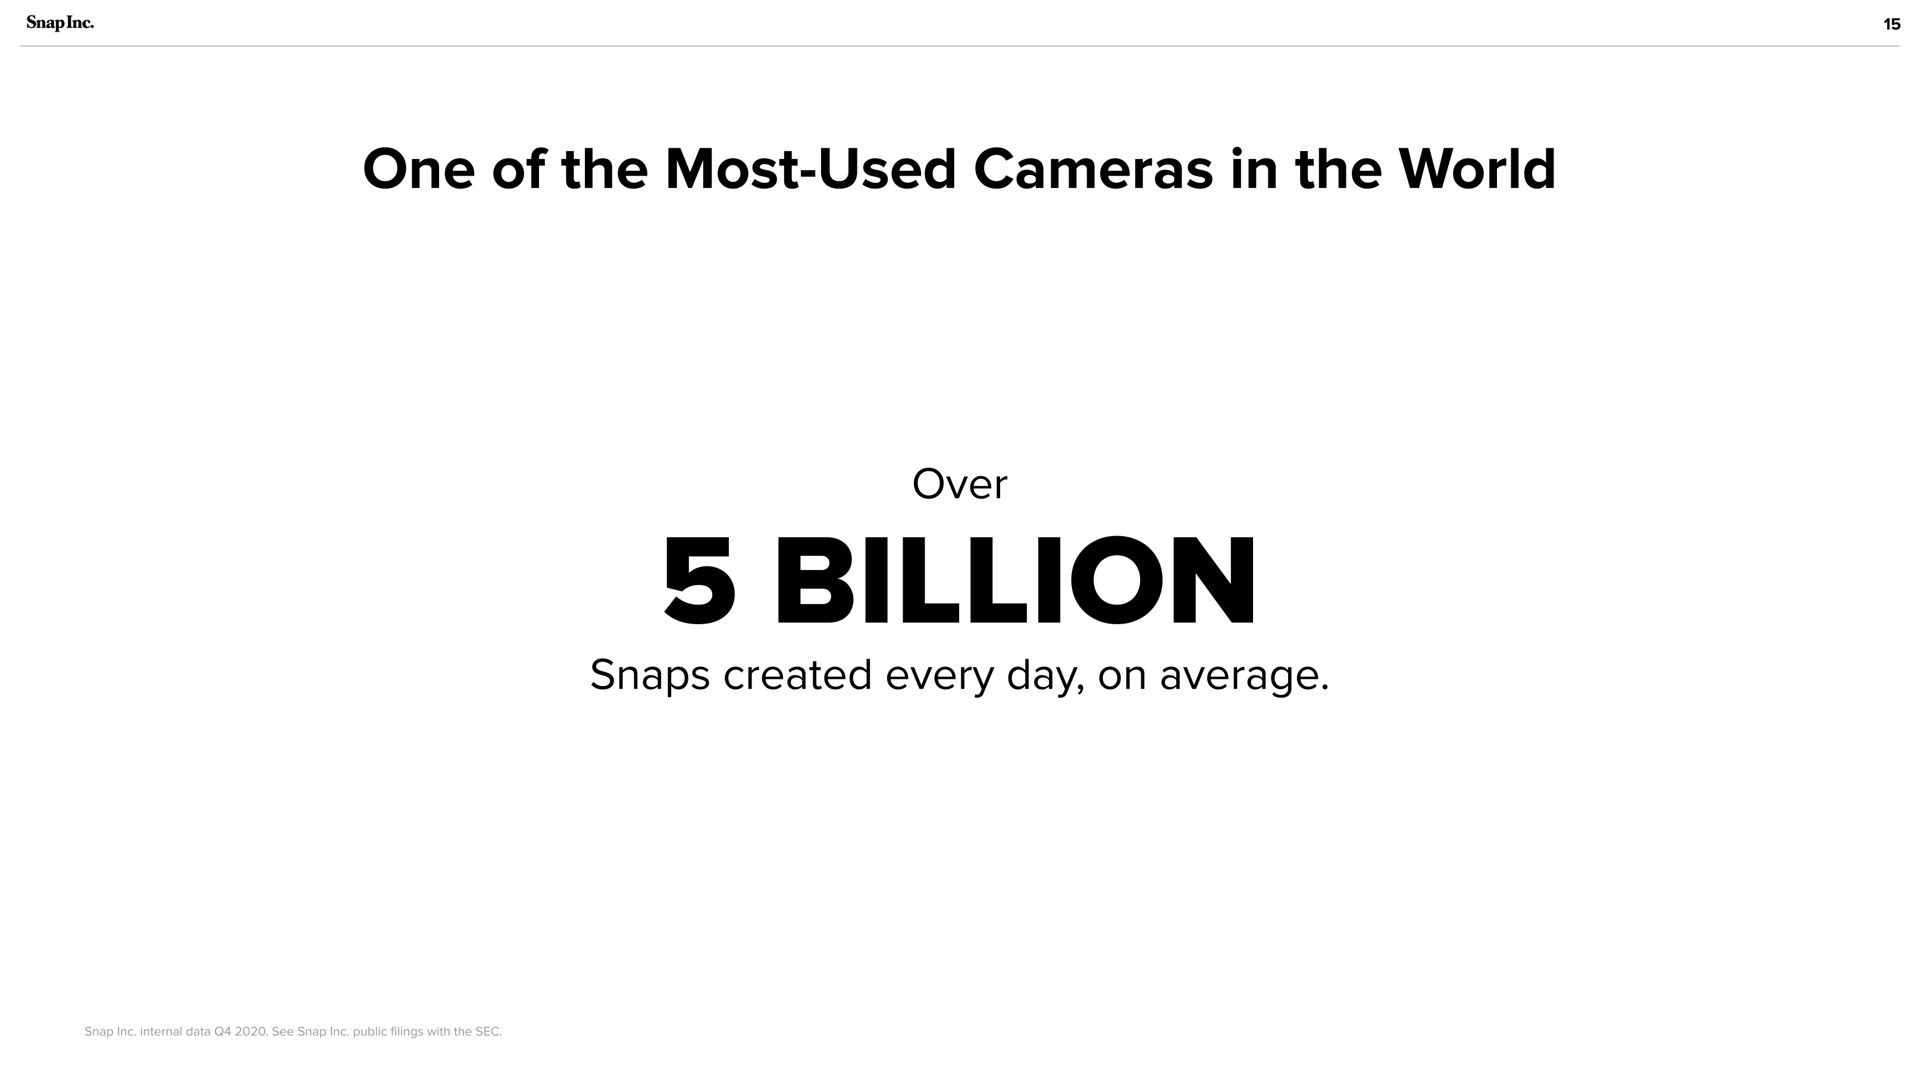 one of the most used cameras in the world billion snaps created every day on average | Snap Inc